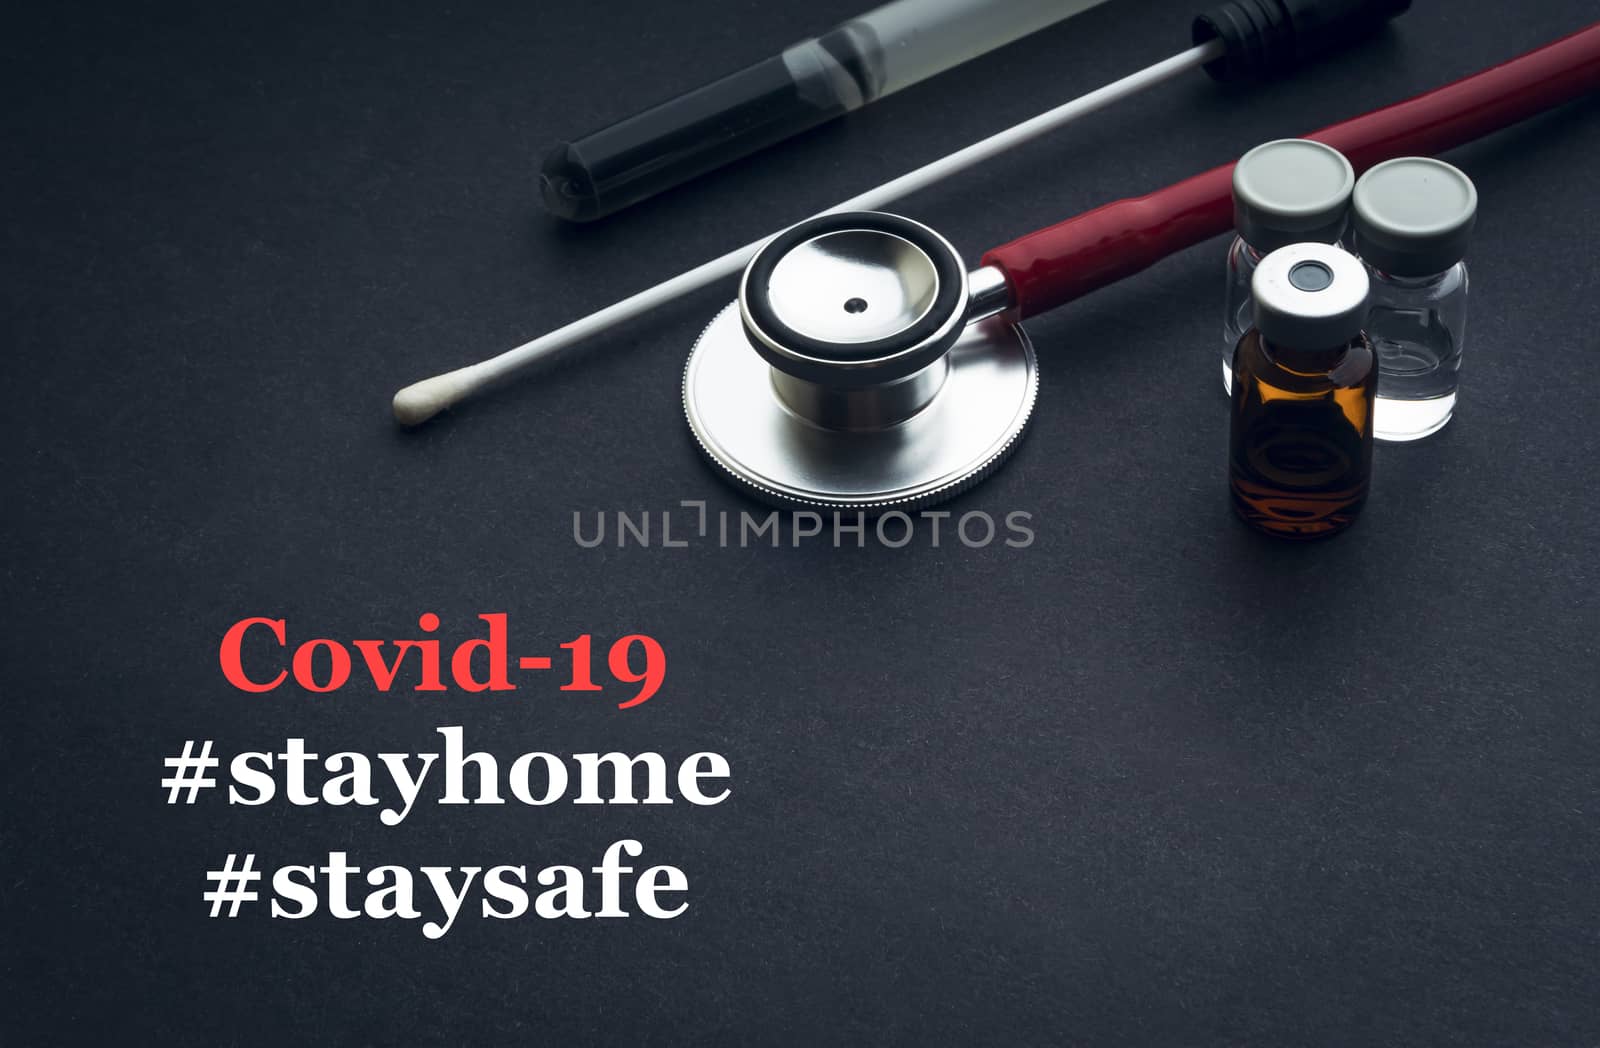 COVID-19 or CORONAVIRUS STAY HOME STAY SAFE text with stethoscope, medical swab and vial on black background. Covid-19 or Coronavirus concept. 